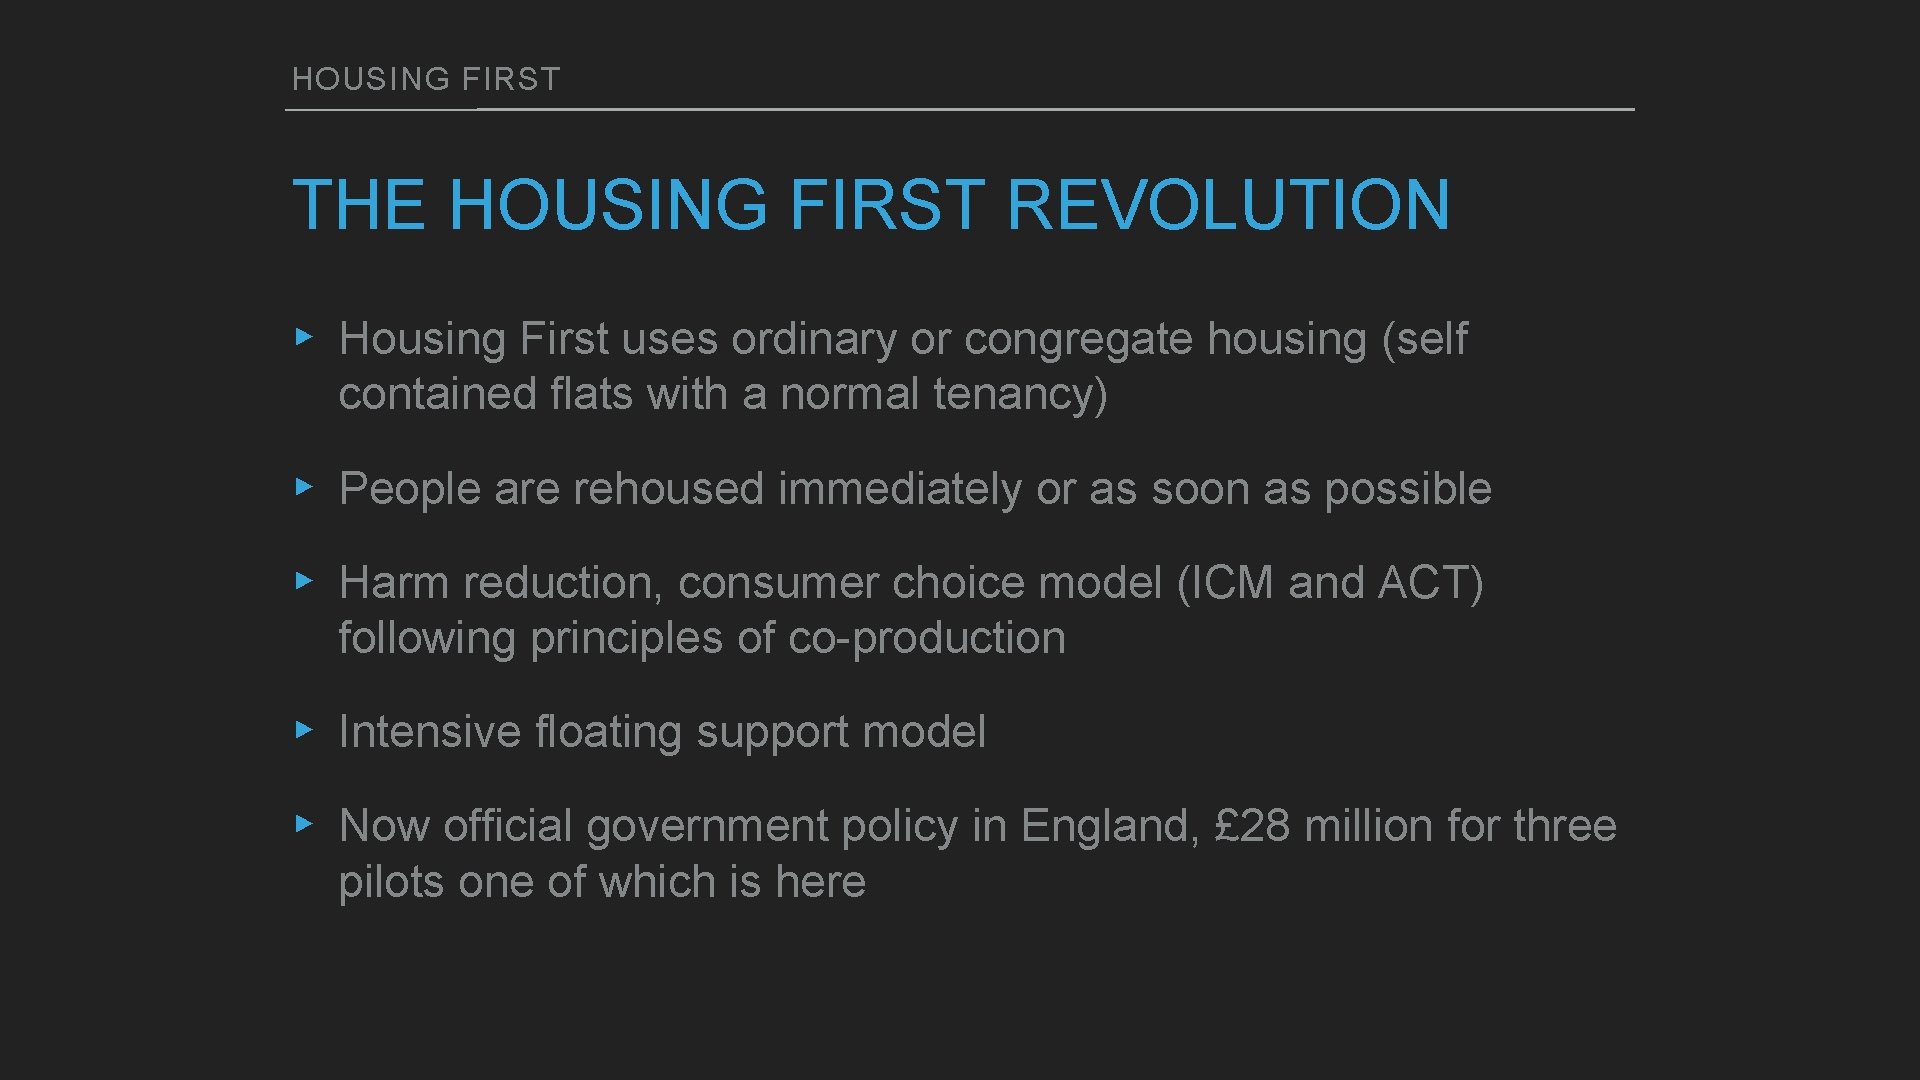 HOUSING FIRST THE HOUSING FIRST REVOLUTION ▸ Housing First uses ordinary or congregate housing